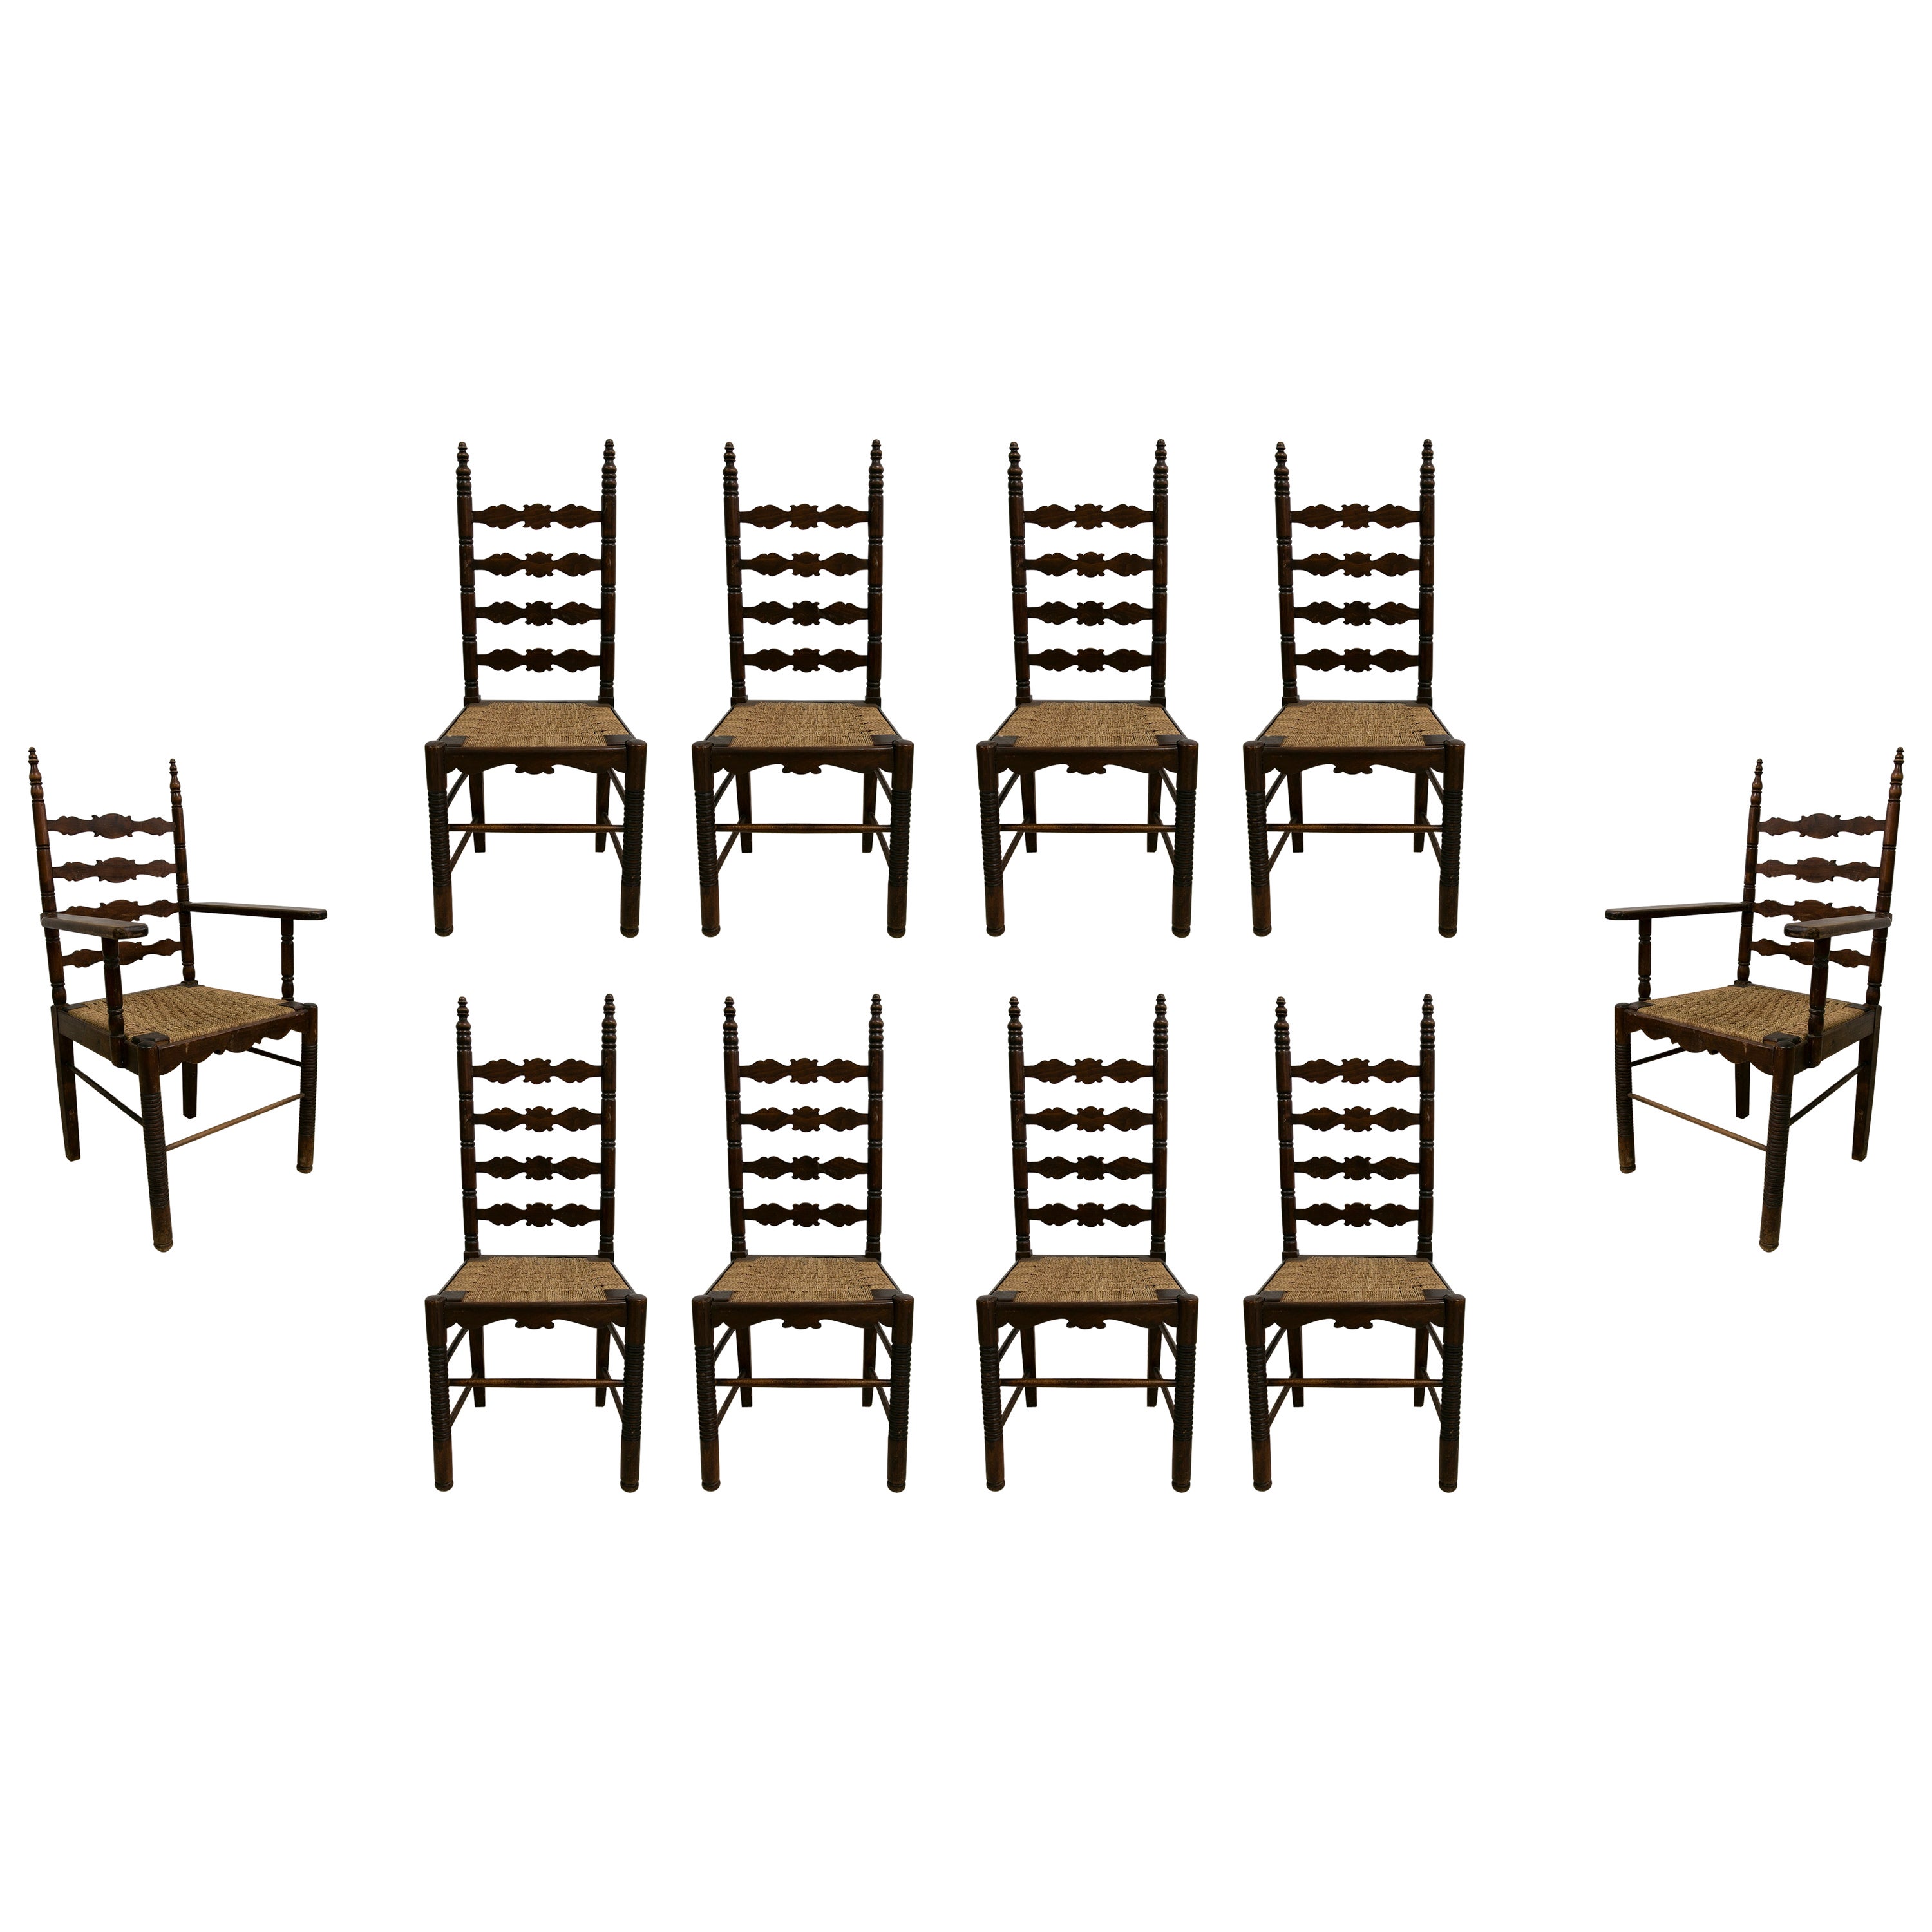 1930s Spanish Andalusian Flamenco Set of 8-Chairs & 2-Armchairs w/ Bulrush Seats For Sale